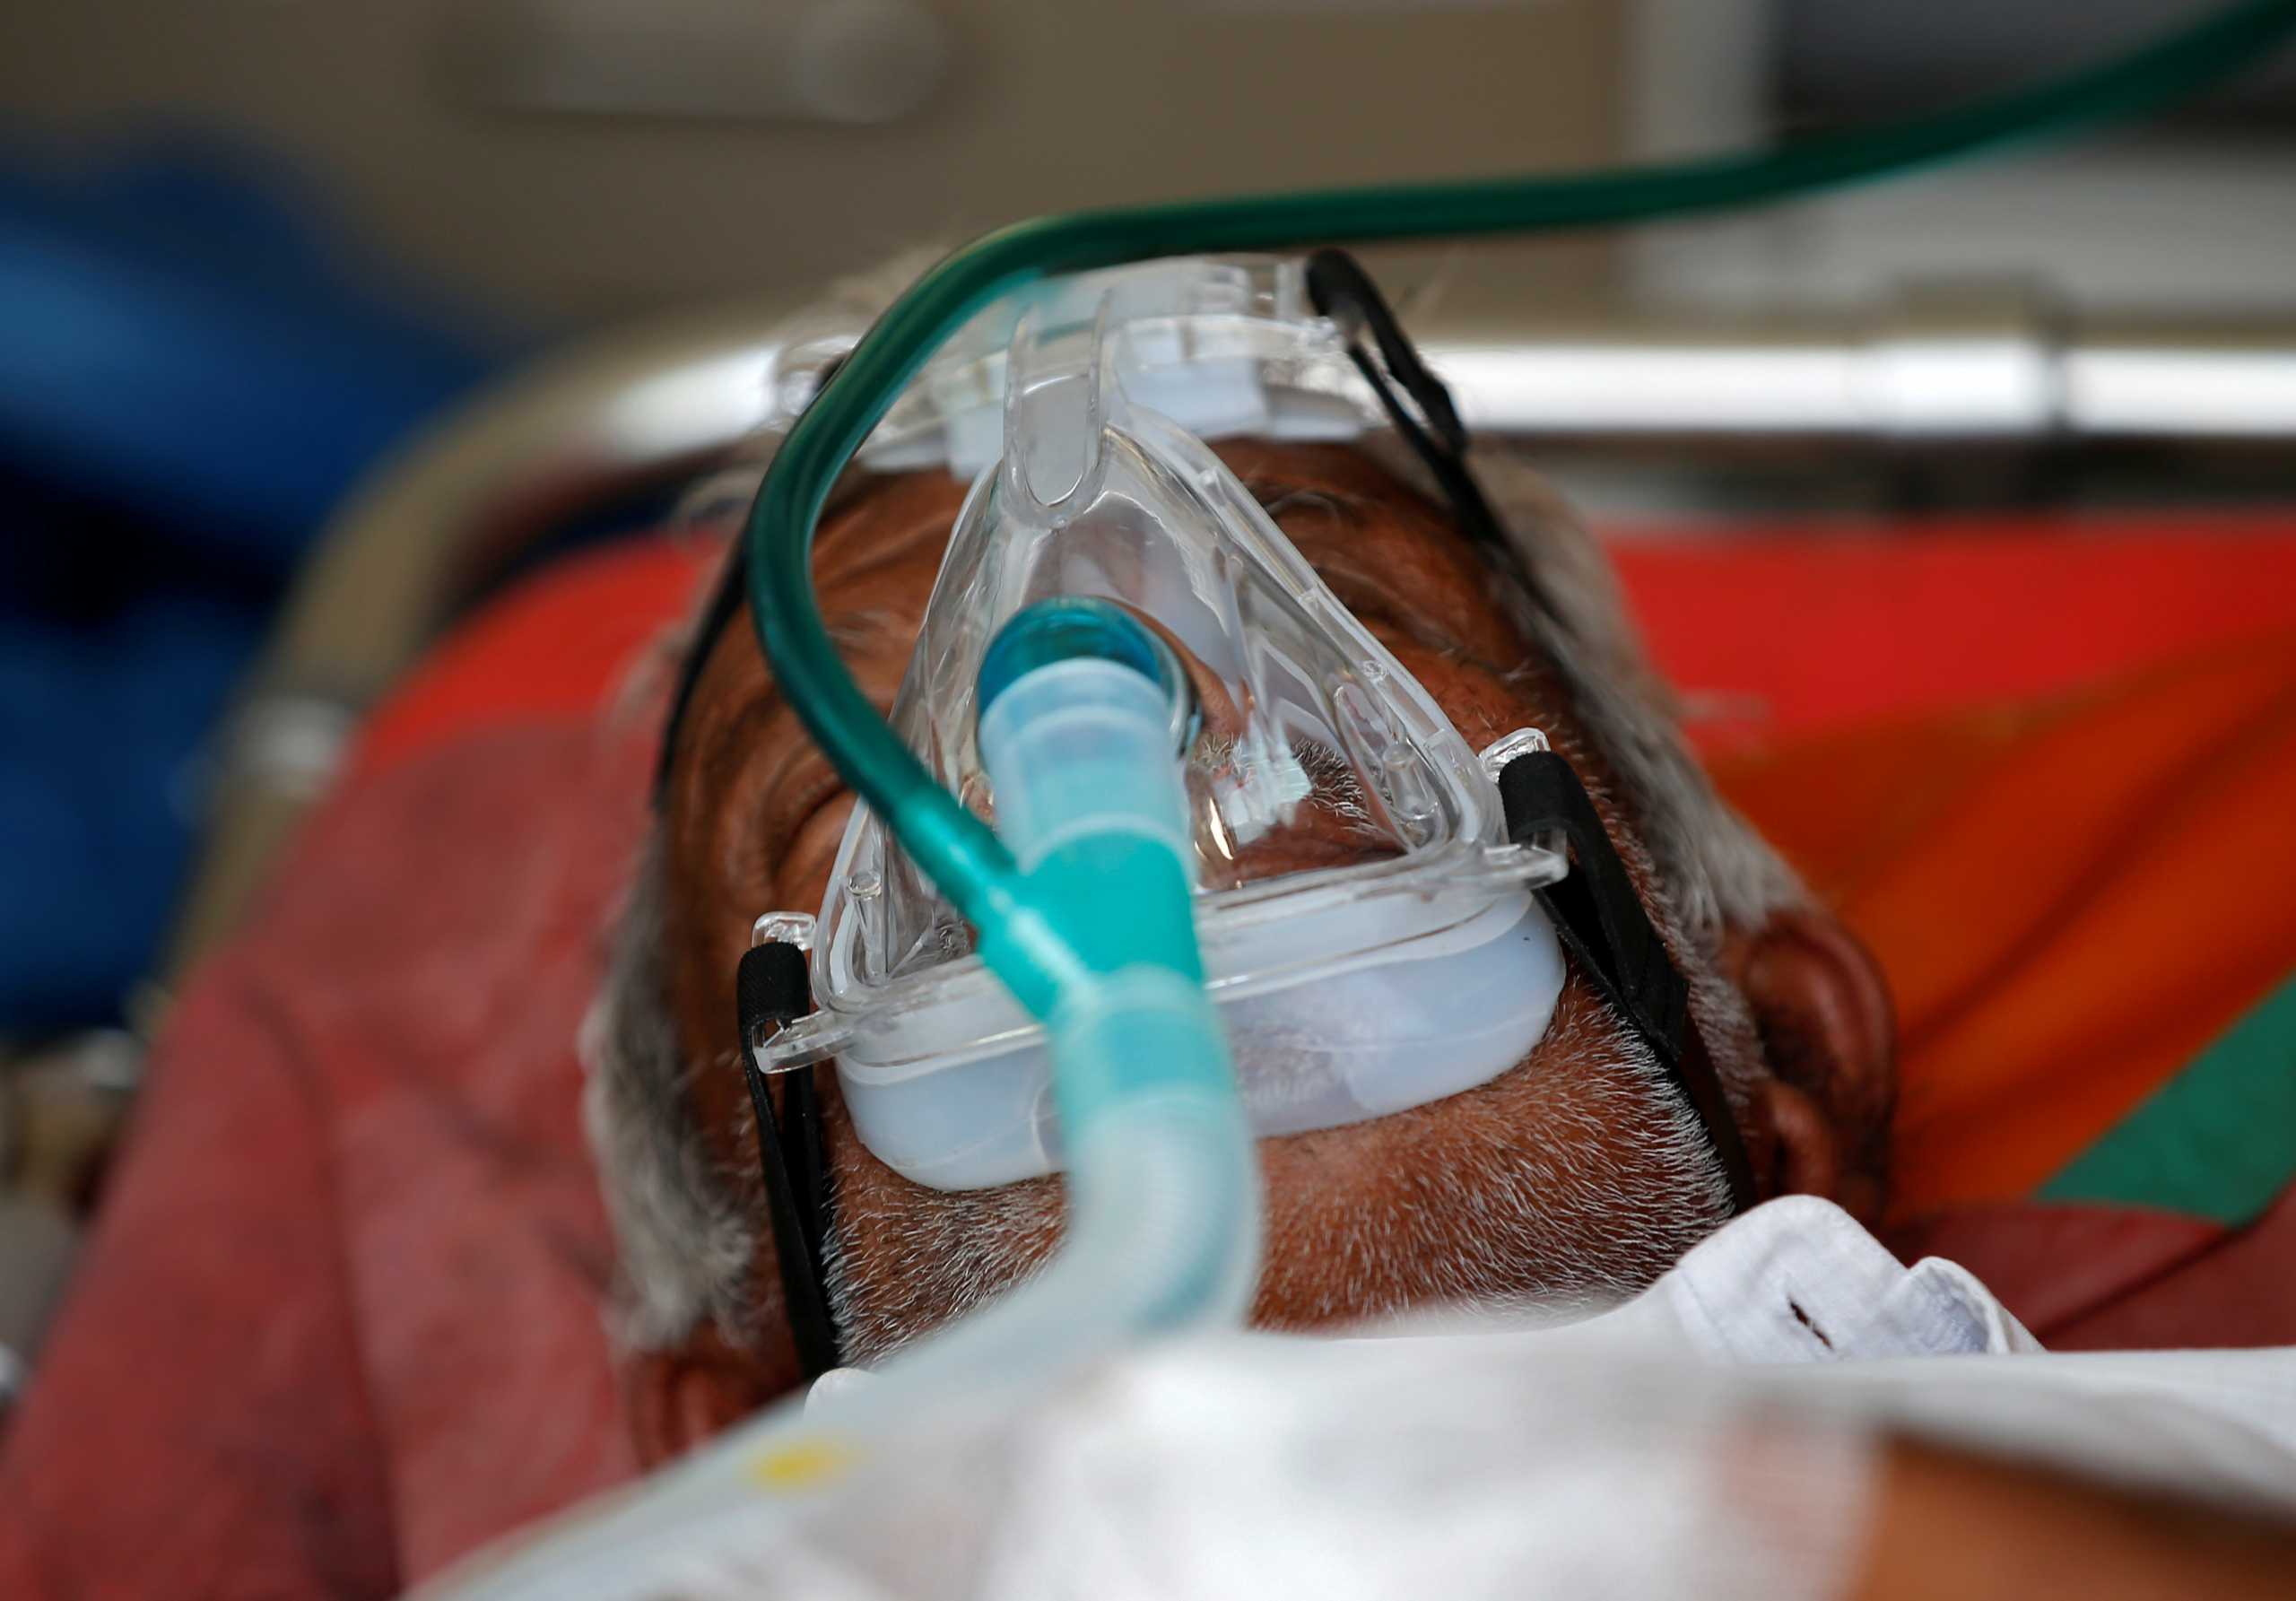 A patient wearing an oxygen mask is seen inside an ambulance waiting to enter a COVID-19 hospital for treatment, amidst the spread of the coronavirus disease (COVID-19) in Ahmedabad, India, April 25, 2021. REUTERS/Amit Dave